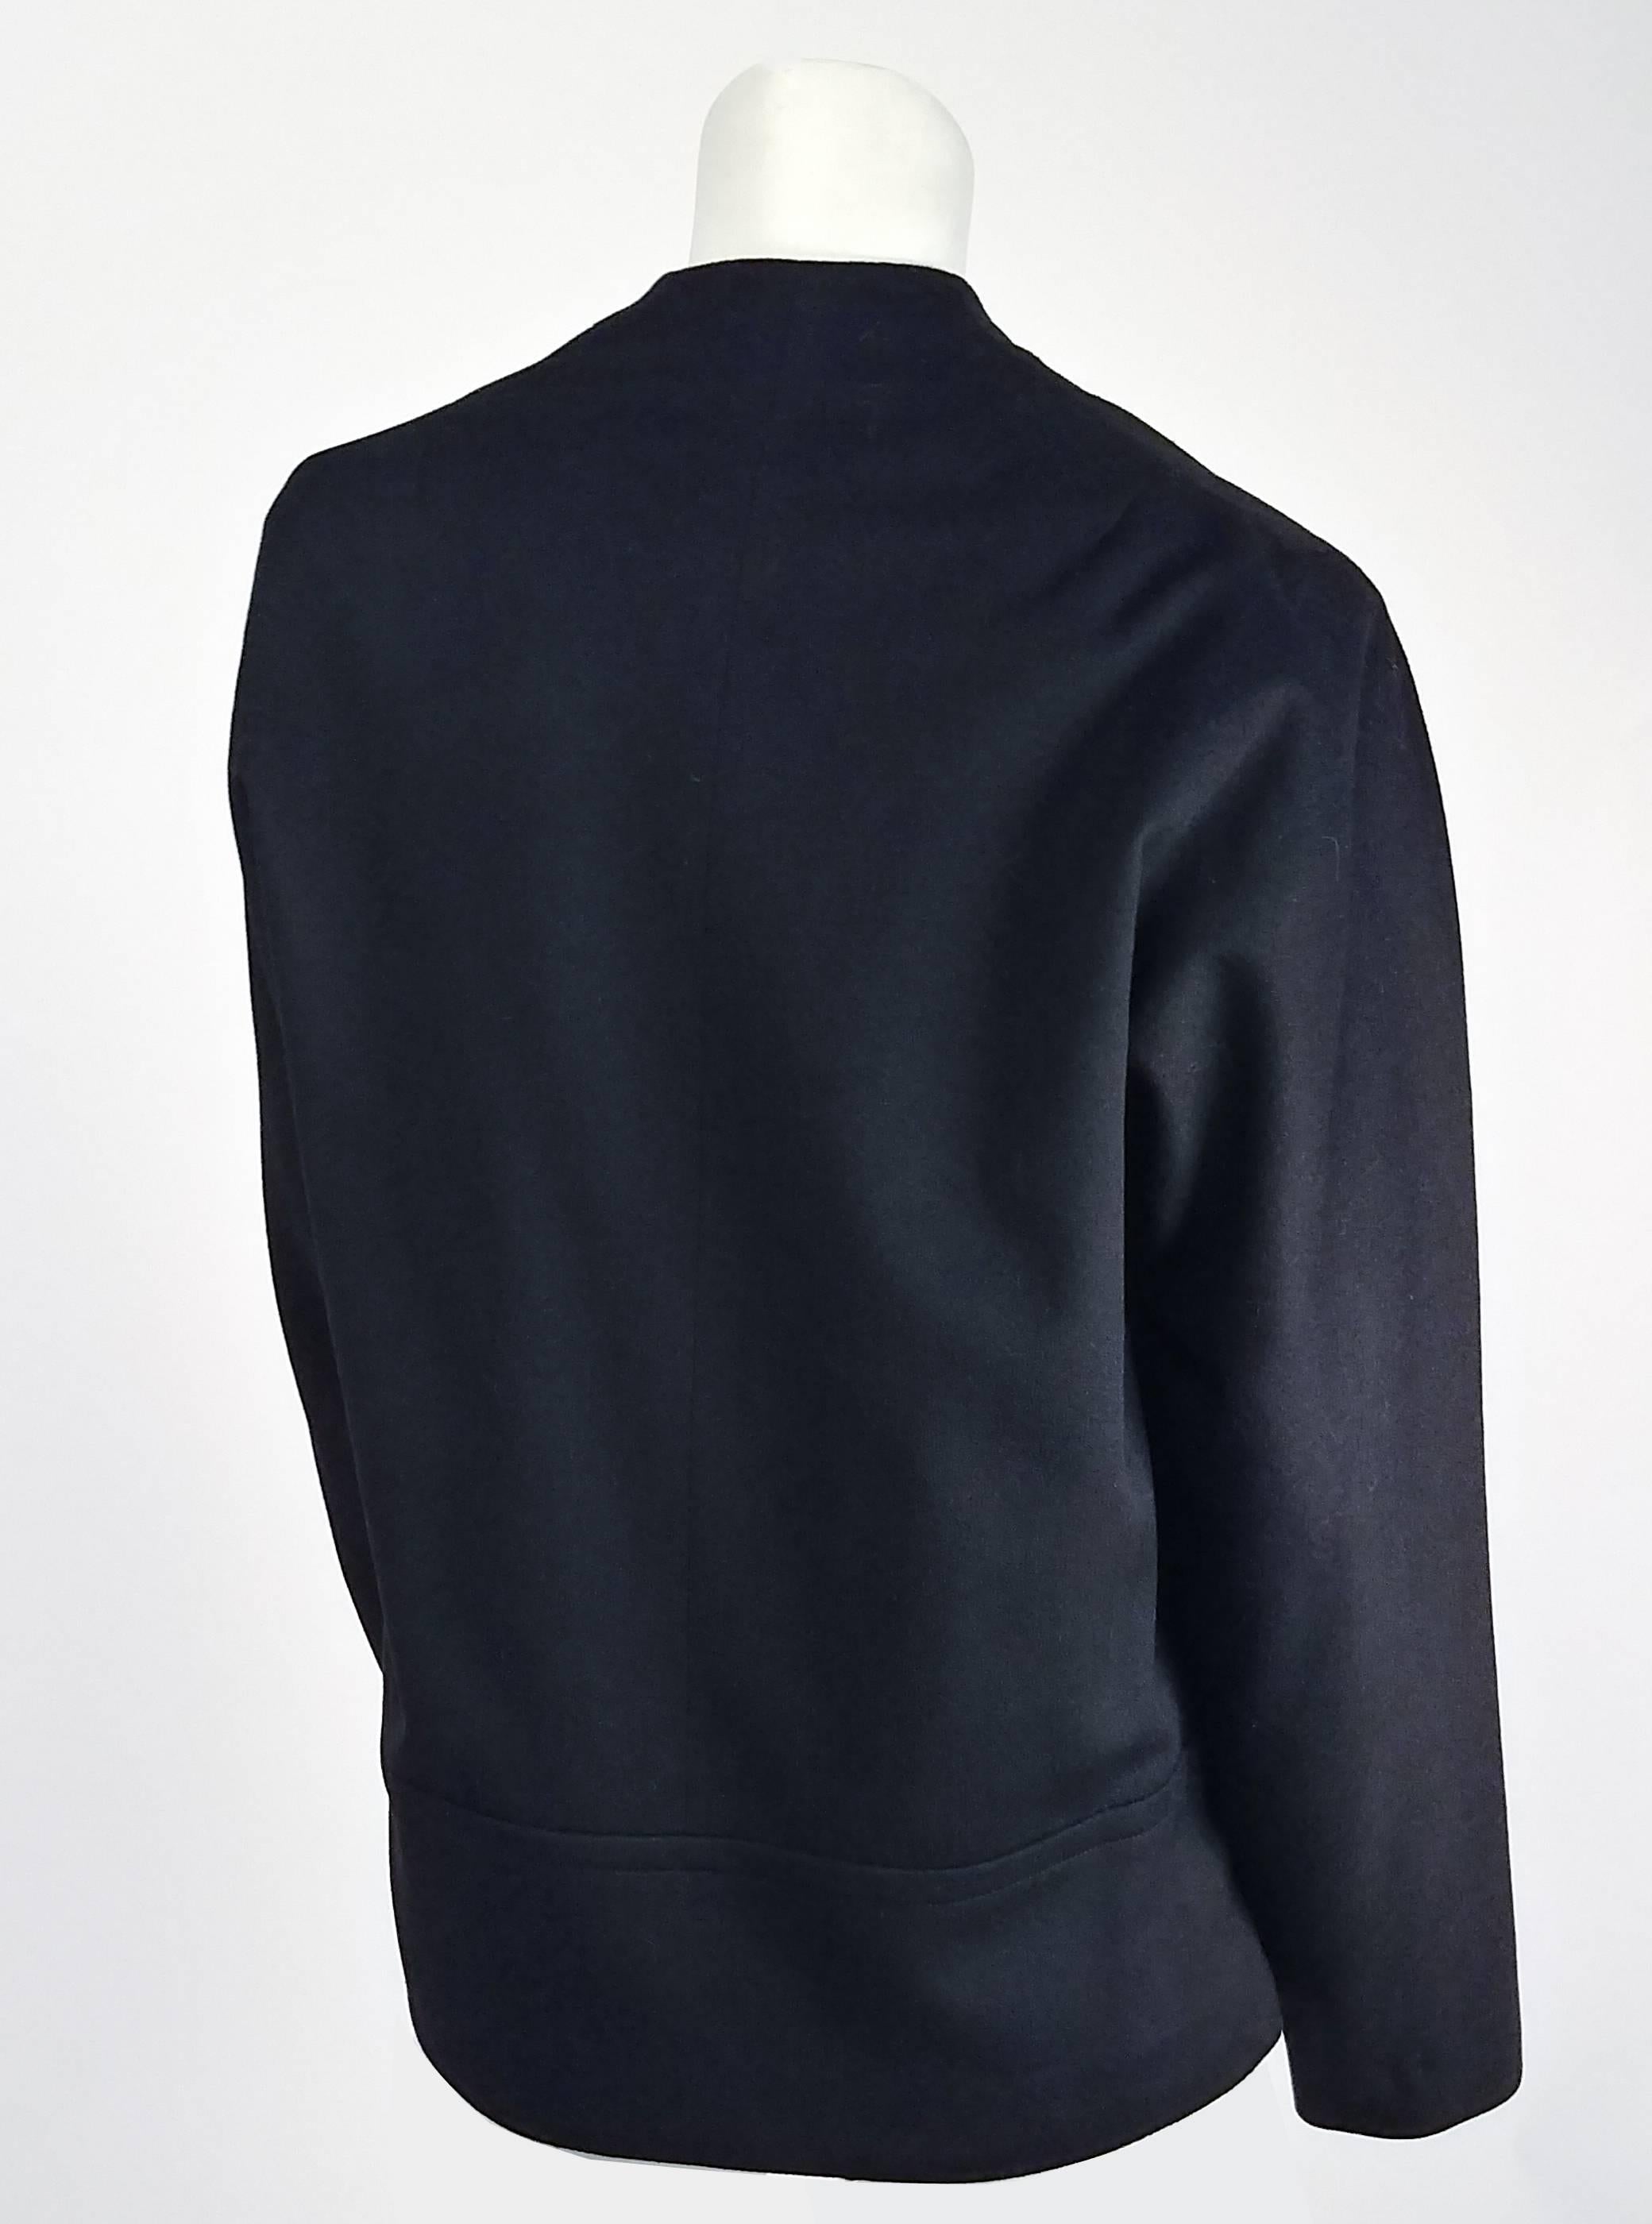 1980s Black Wool Shawl Collar Jacket  In Excellent Condition For Sale In San Francisco, CA